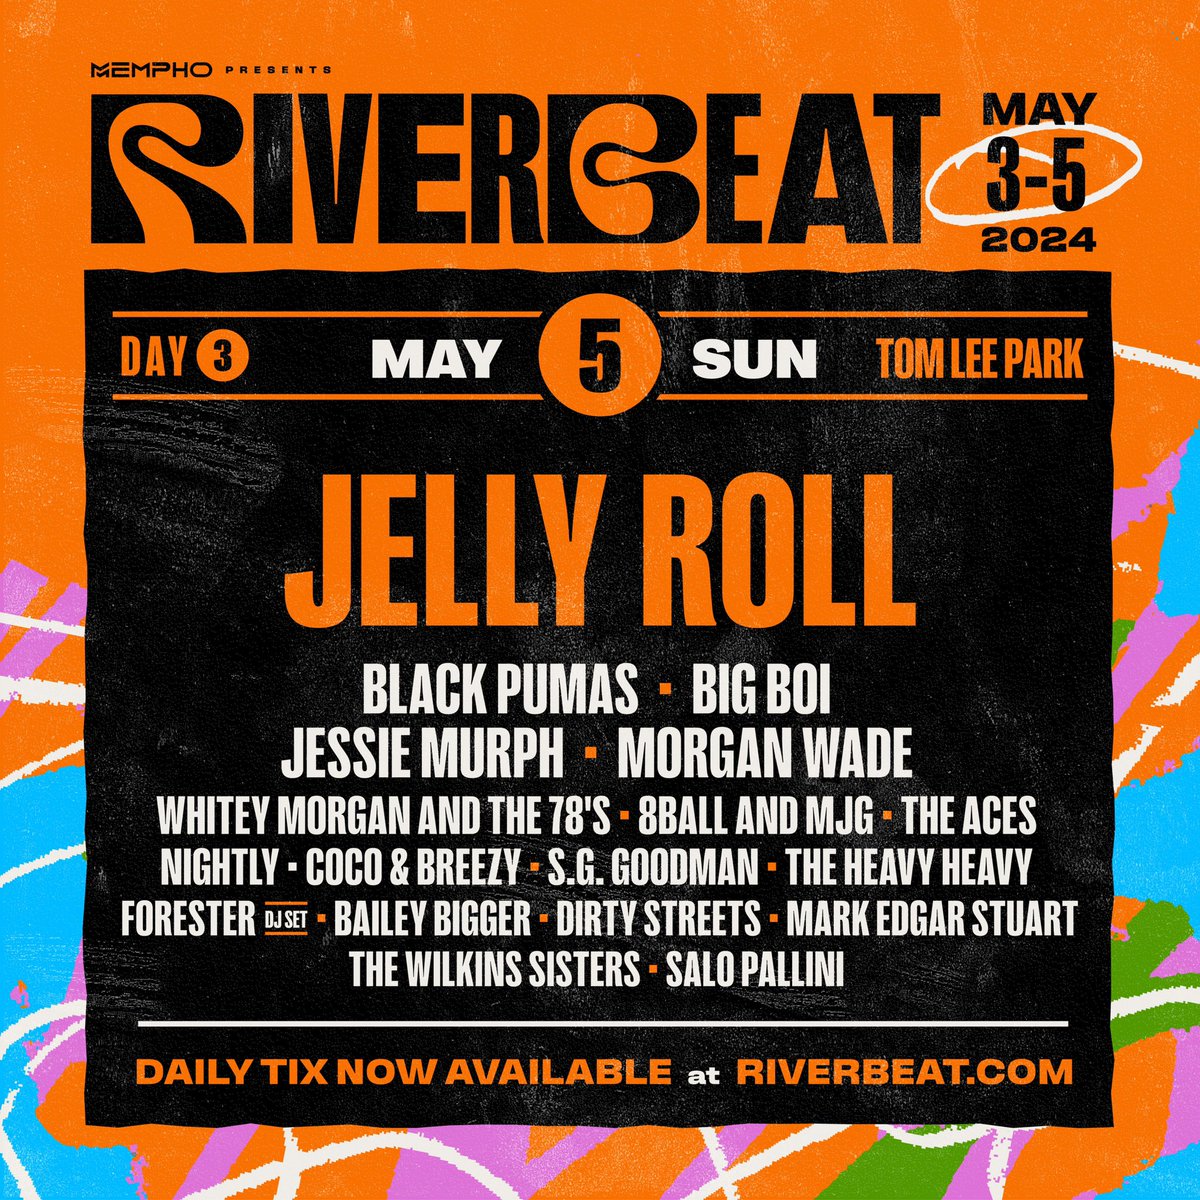 see you in memphis tomorrow @RiverBeatfest <3 main stage at 3:45